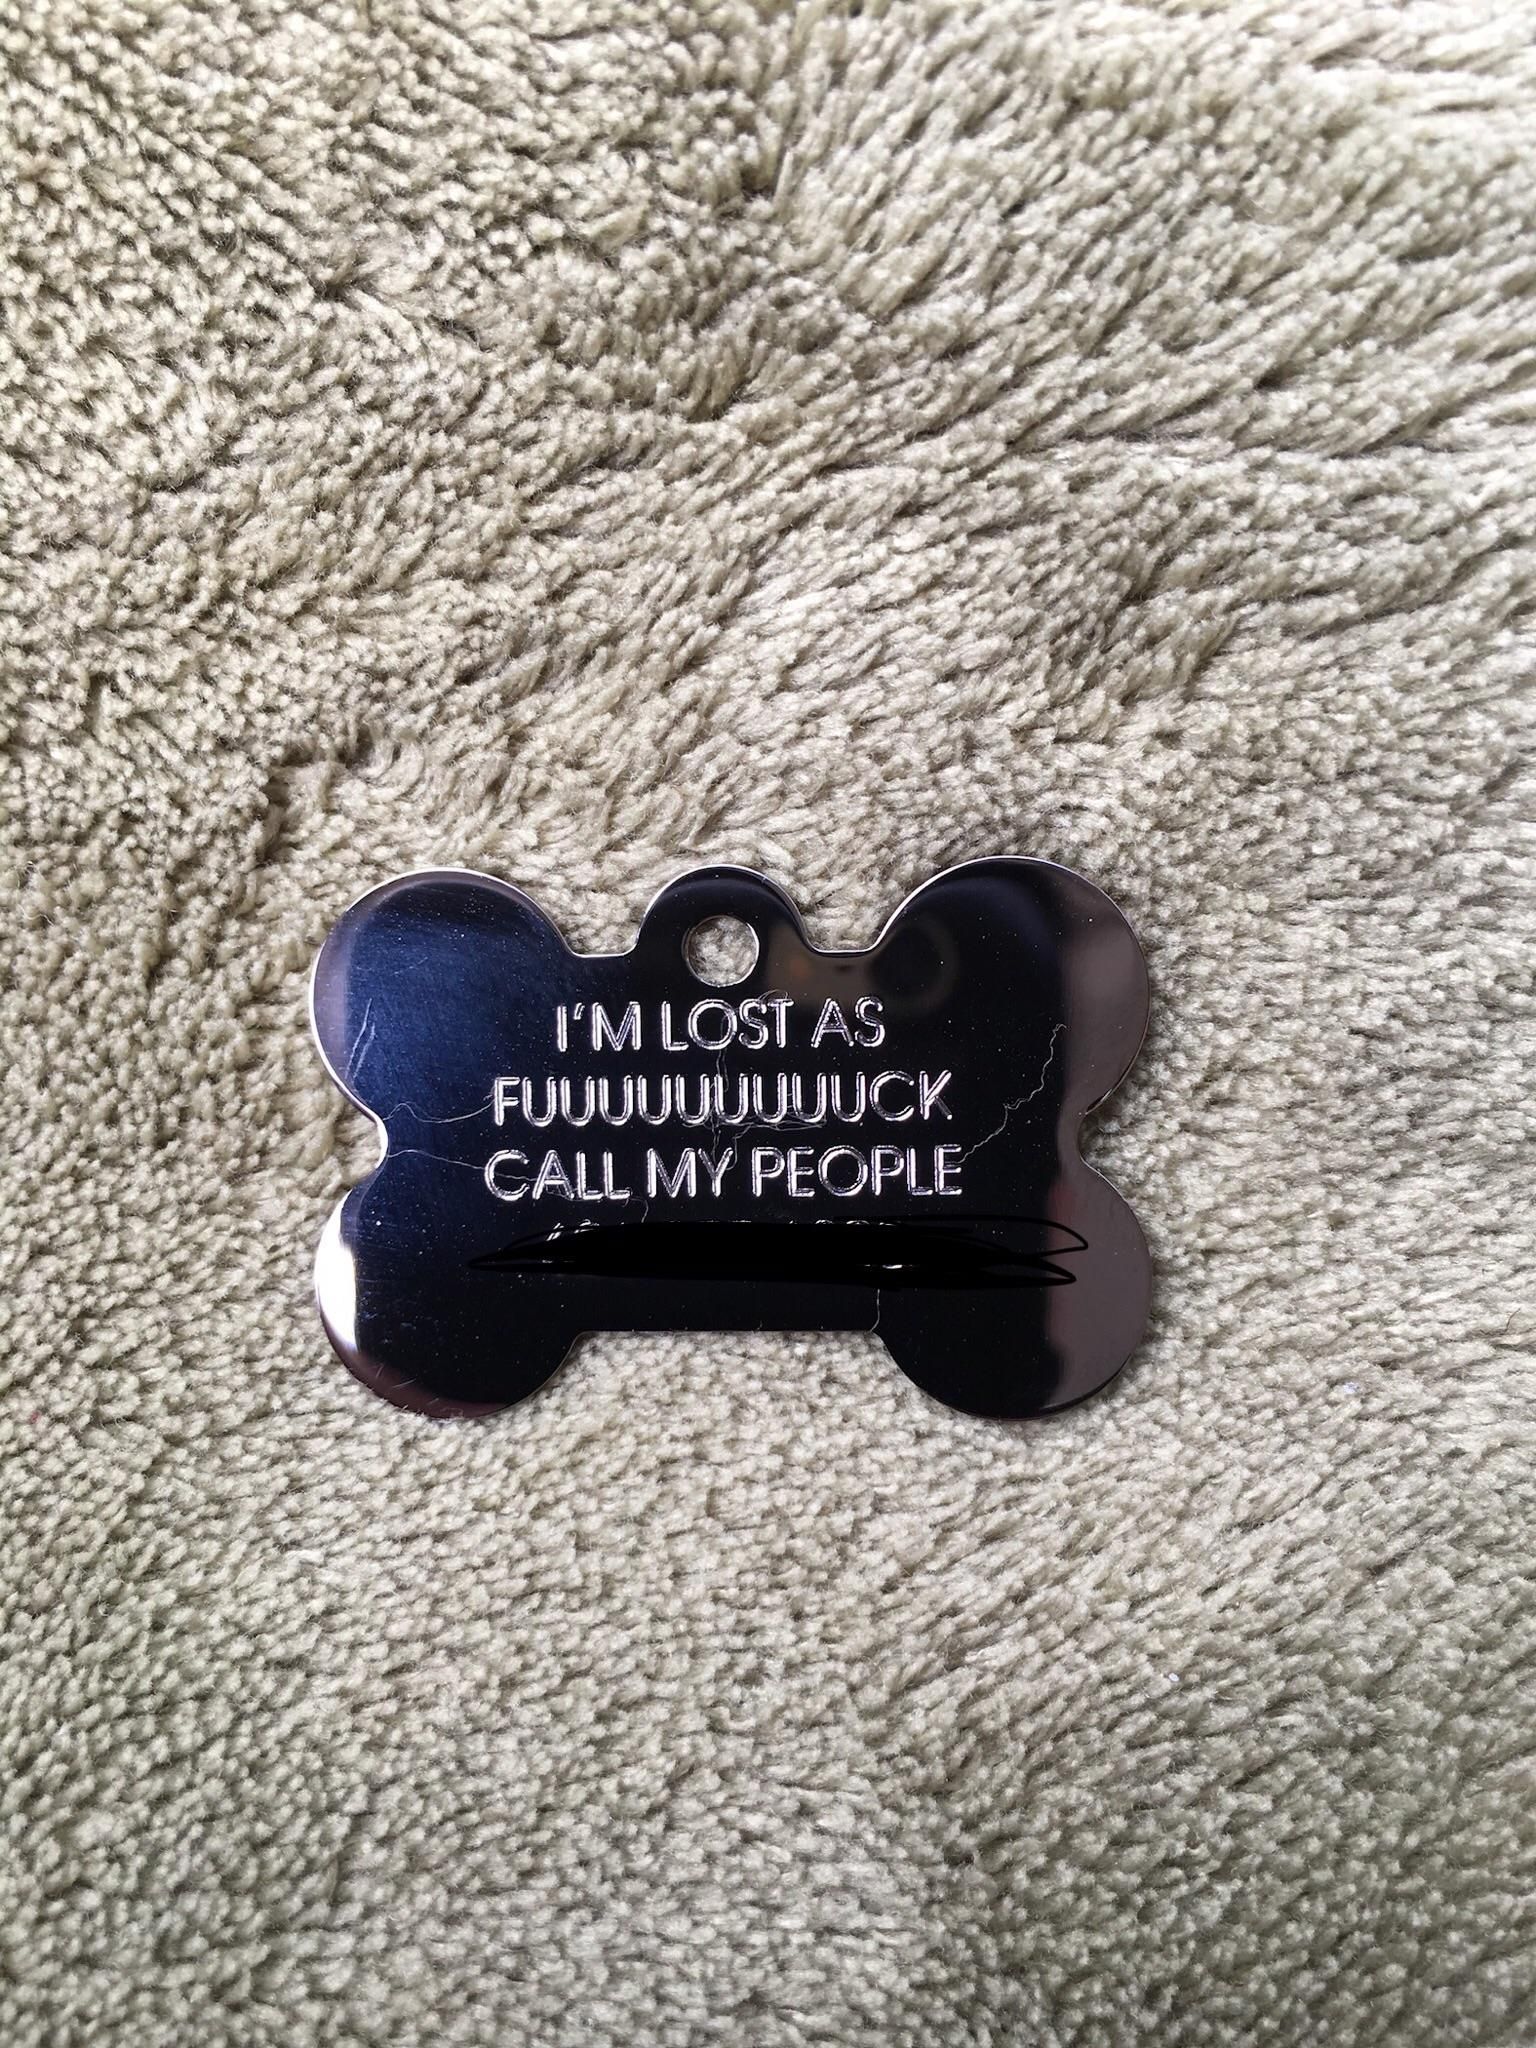 Got Creative With The Dog Tag Maker